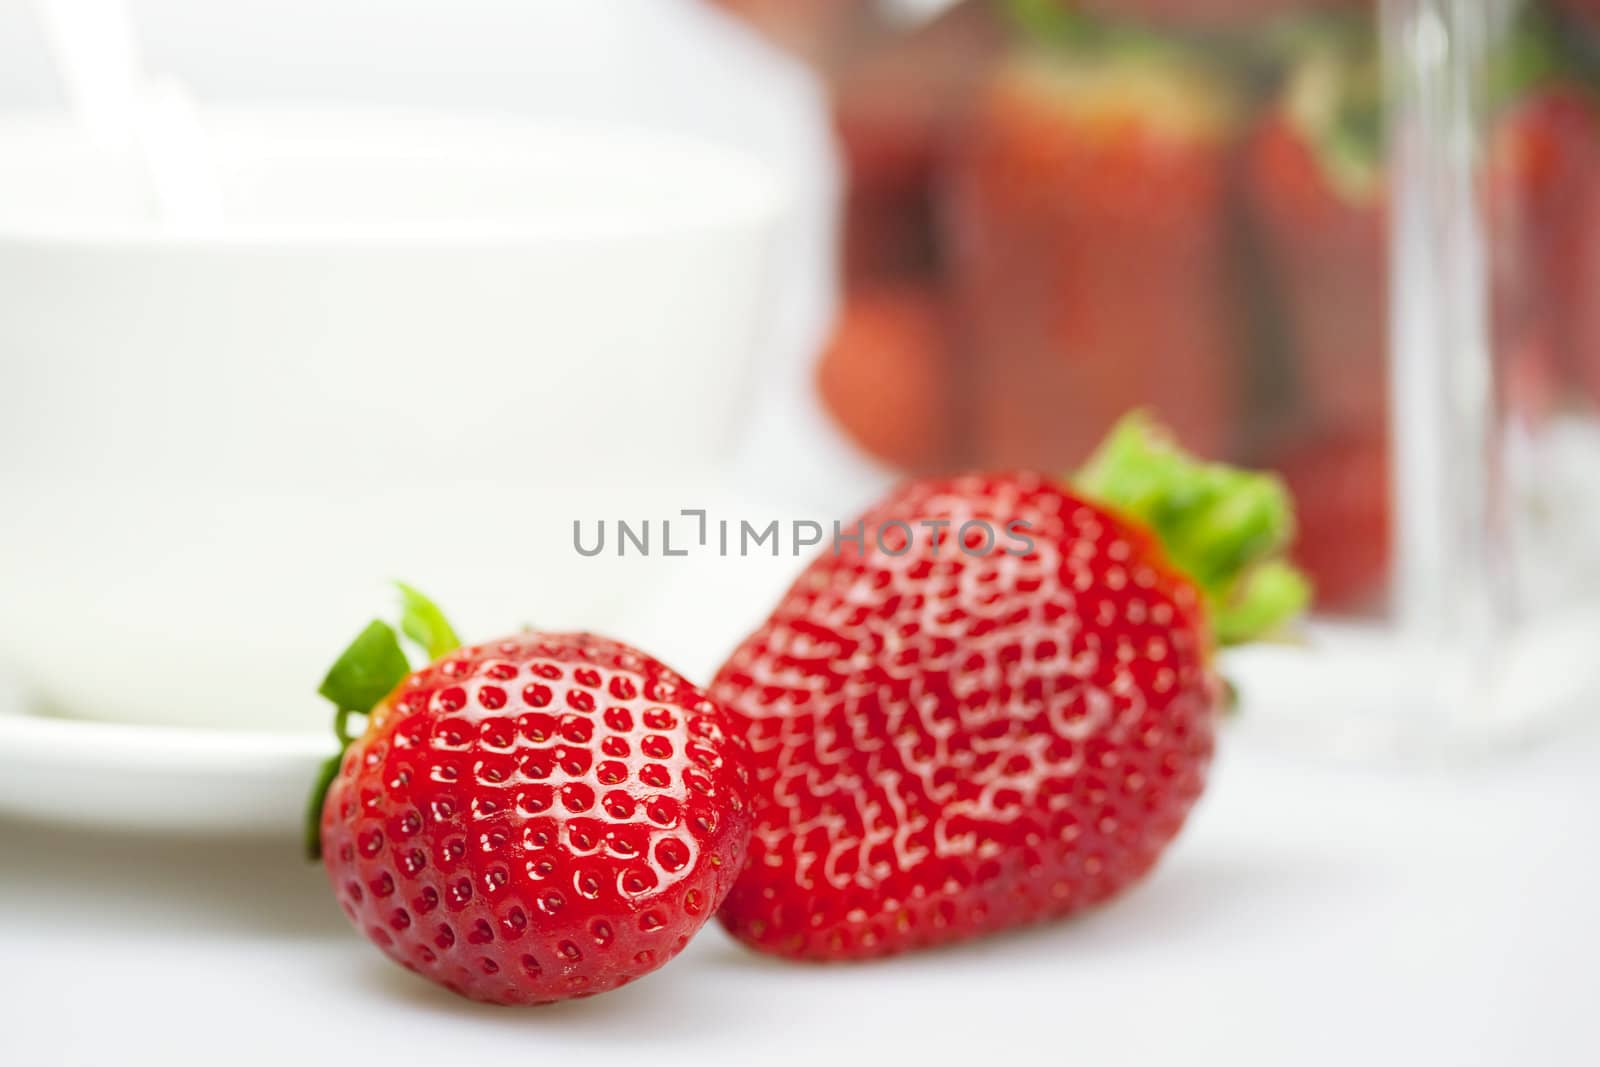 juicy strawberries and a cup of white isolated on white